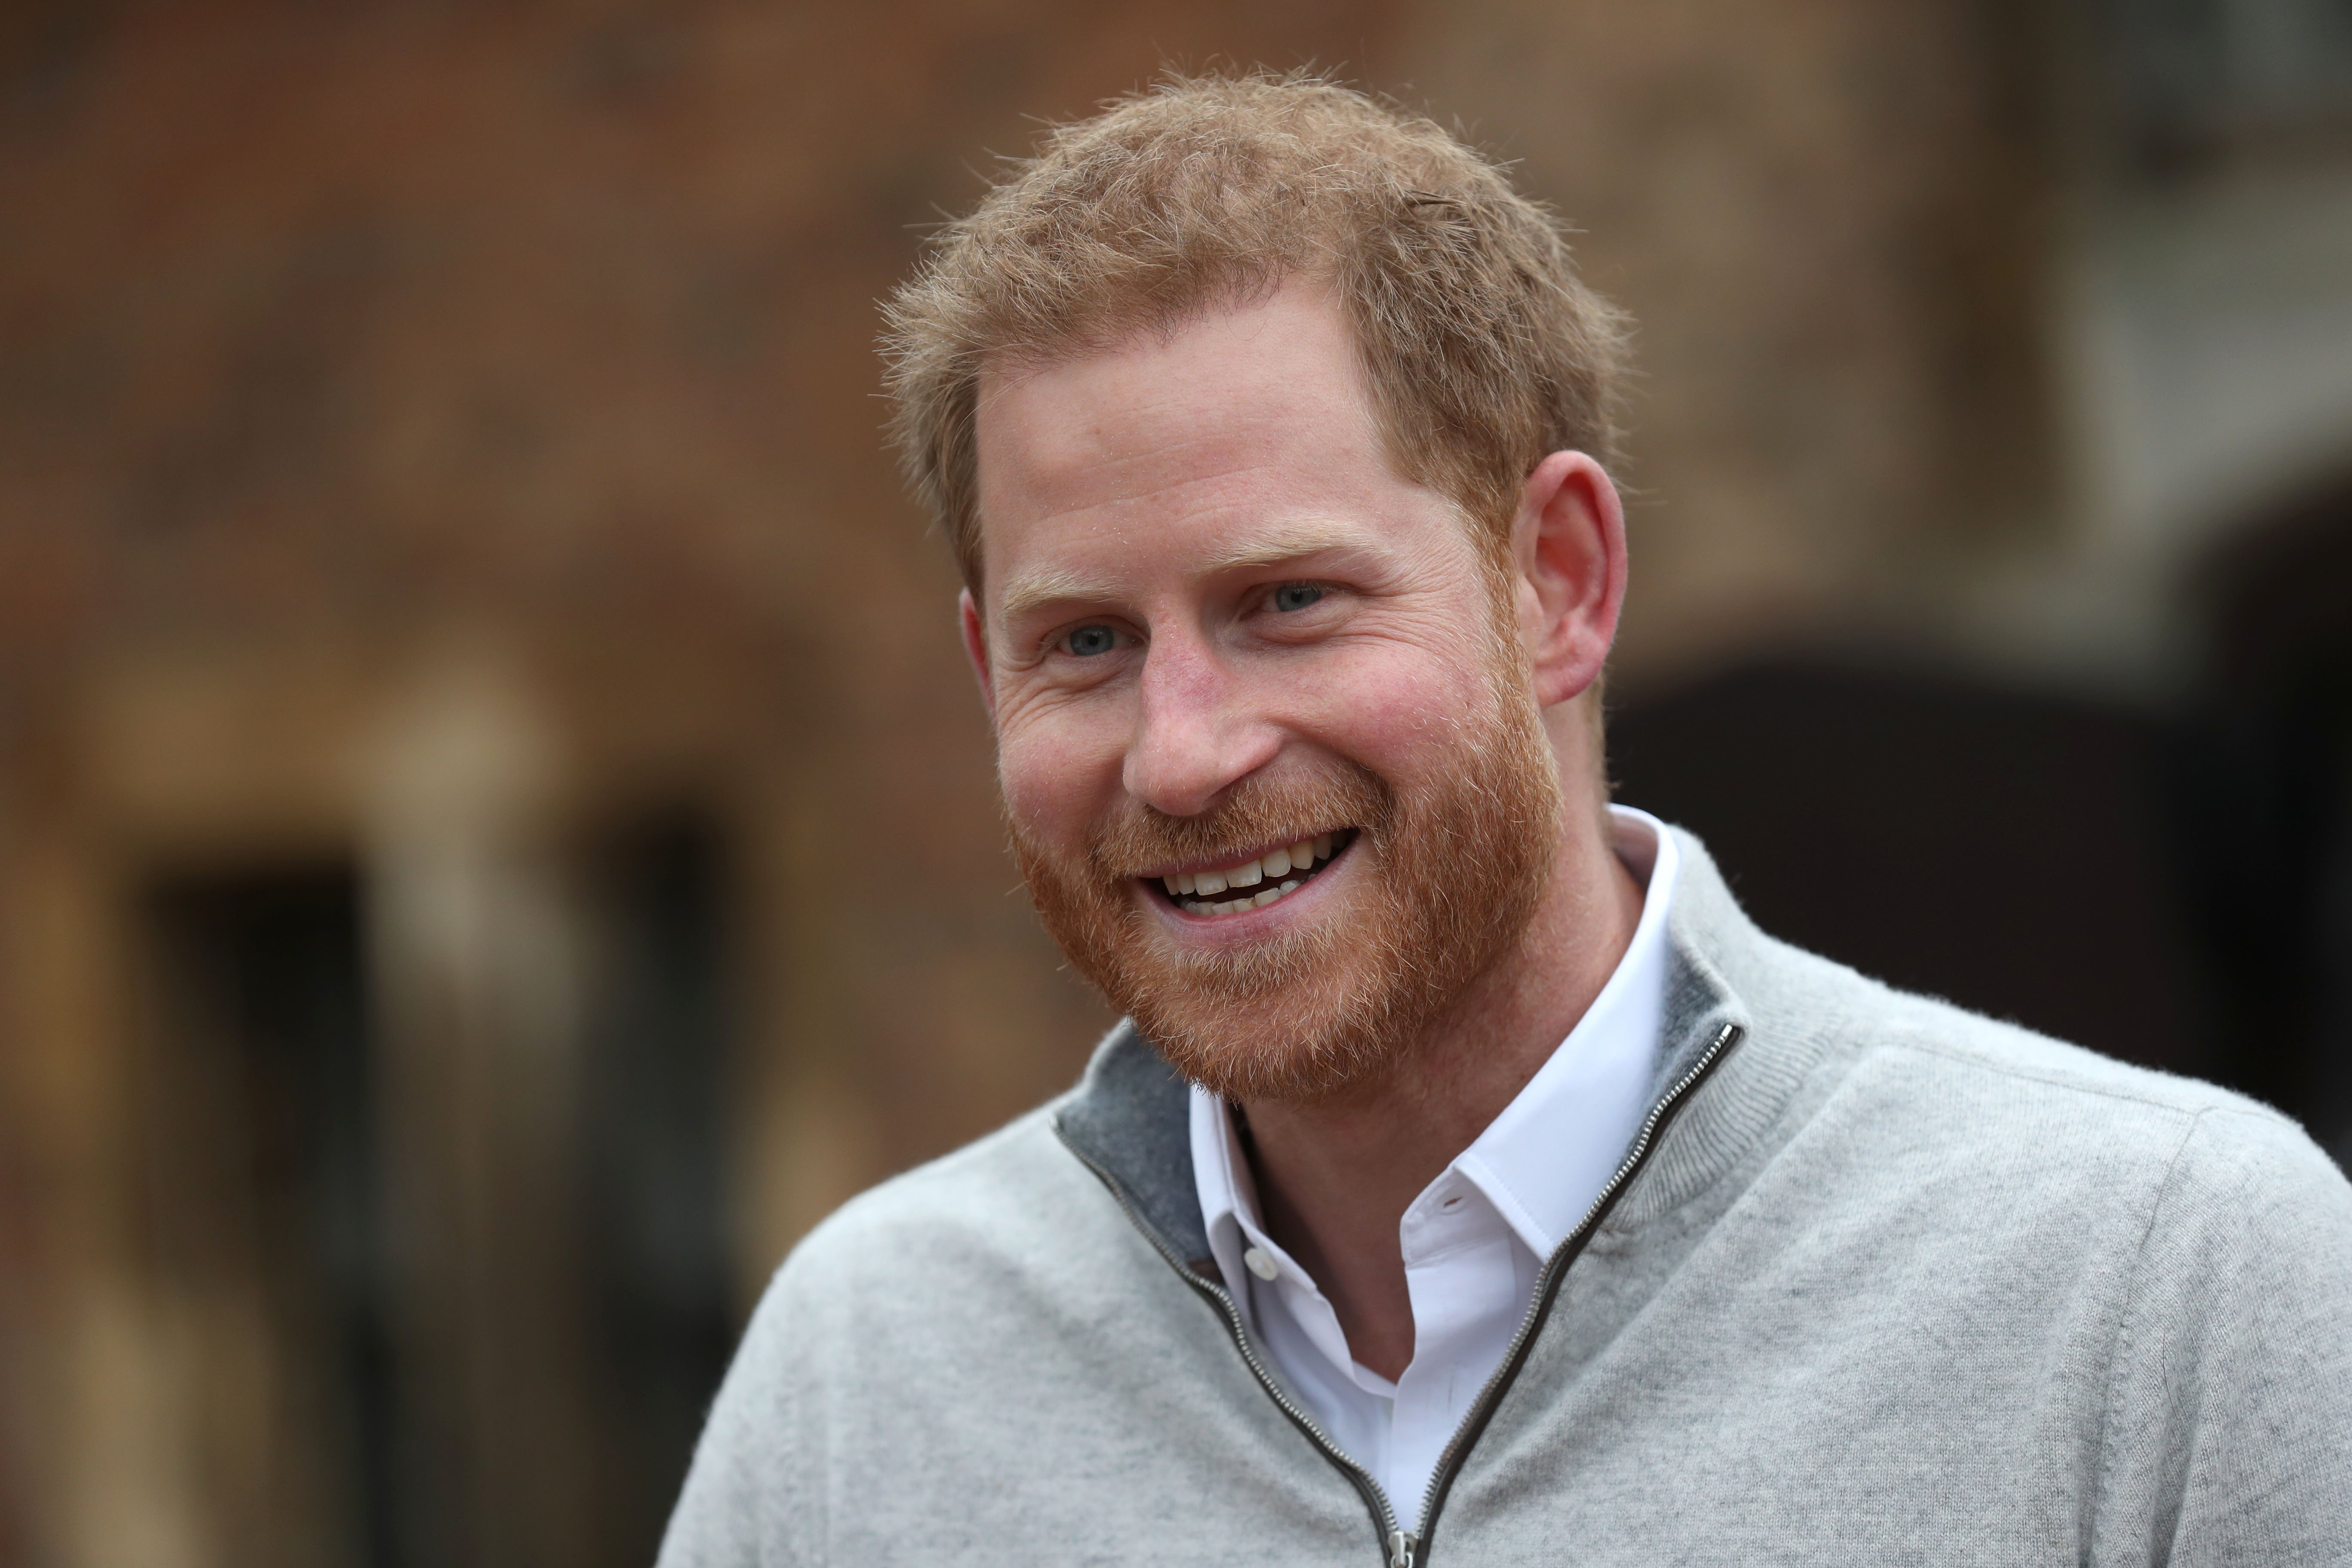 Prince Harry, Duke of Sussex during an interview with the media at Windsor Castle following the birth of his son on May 06, 2019 in Windsor, United Kingdom. / Source: Getty Images